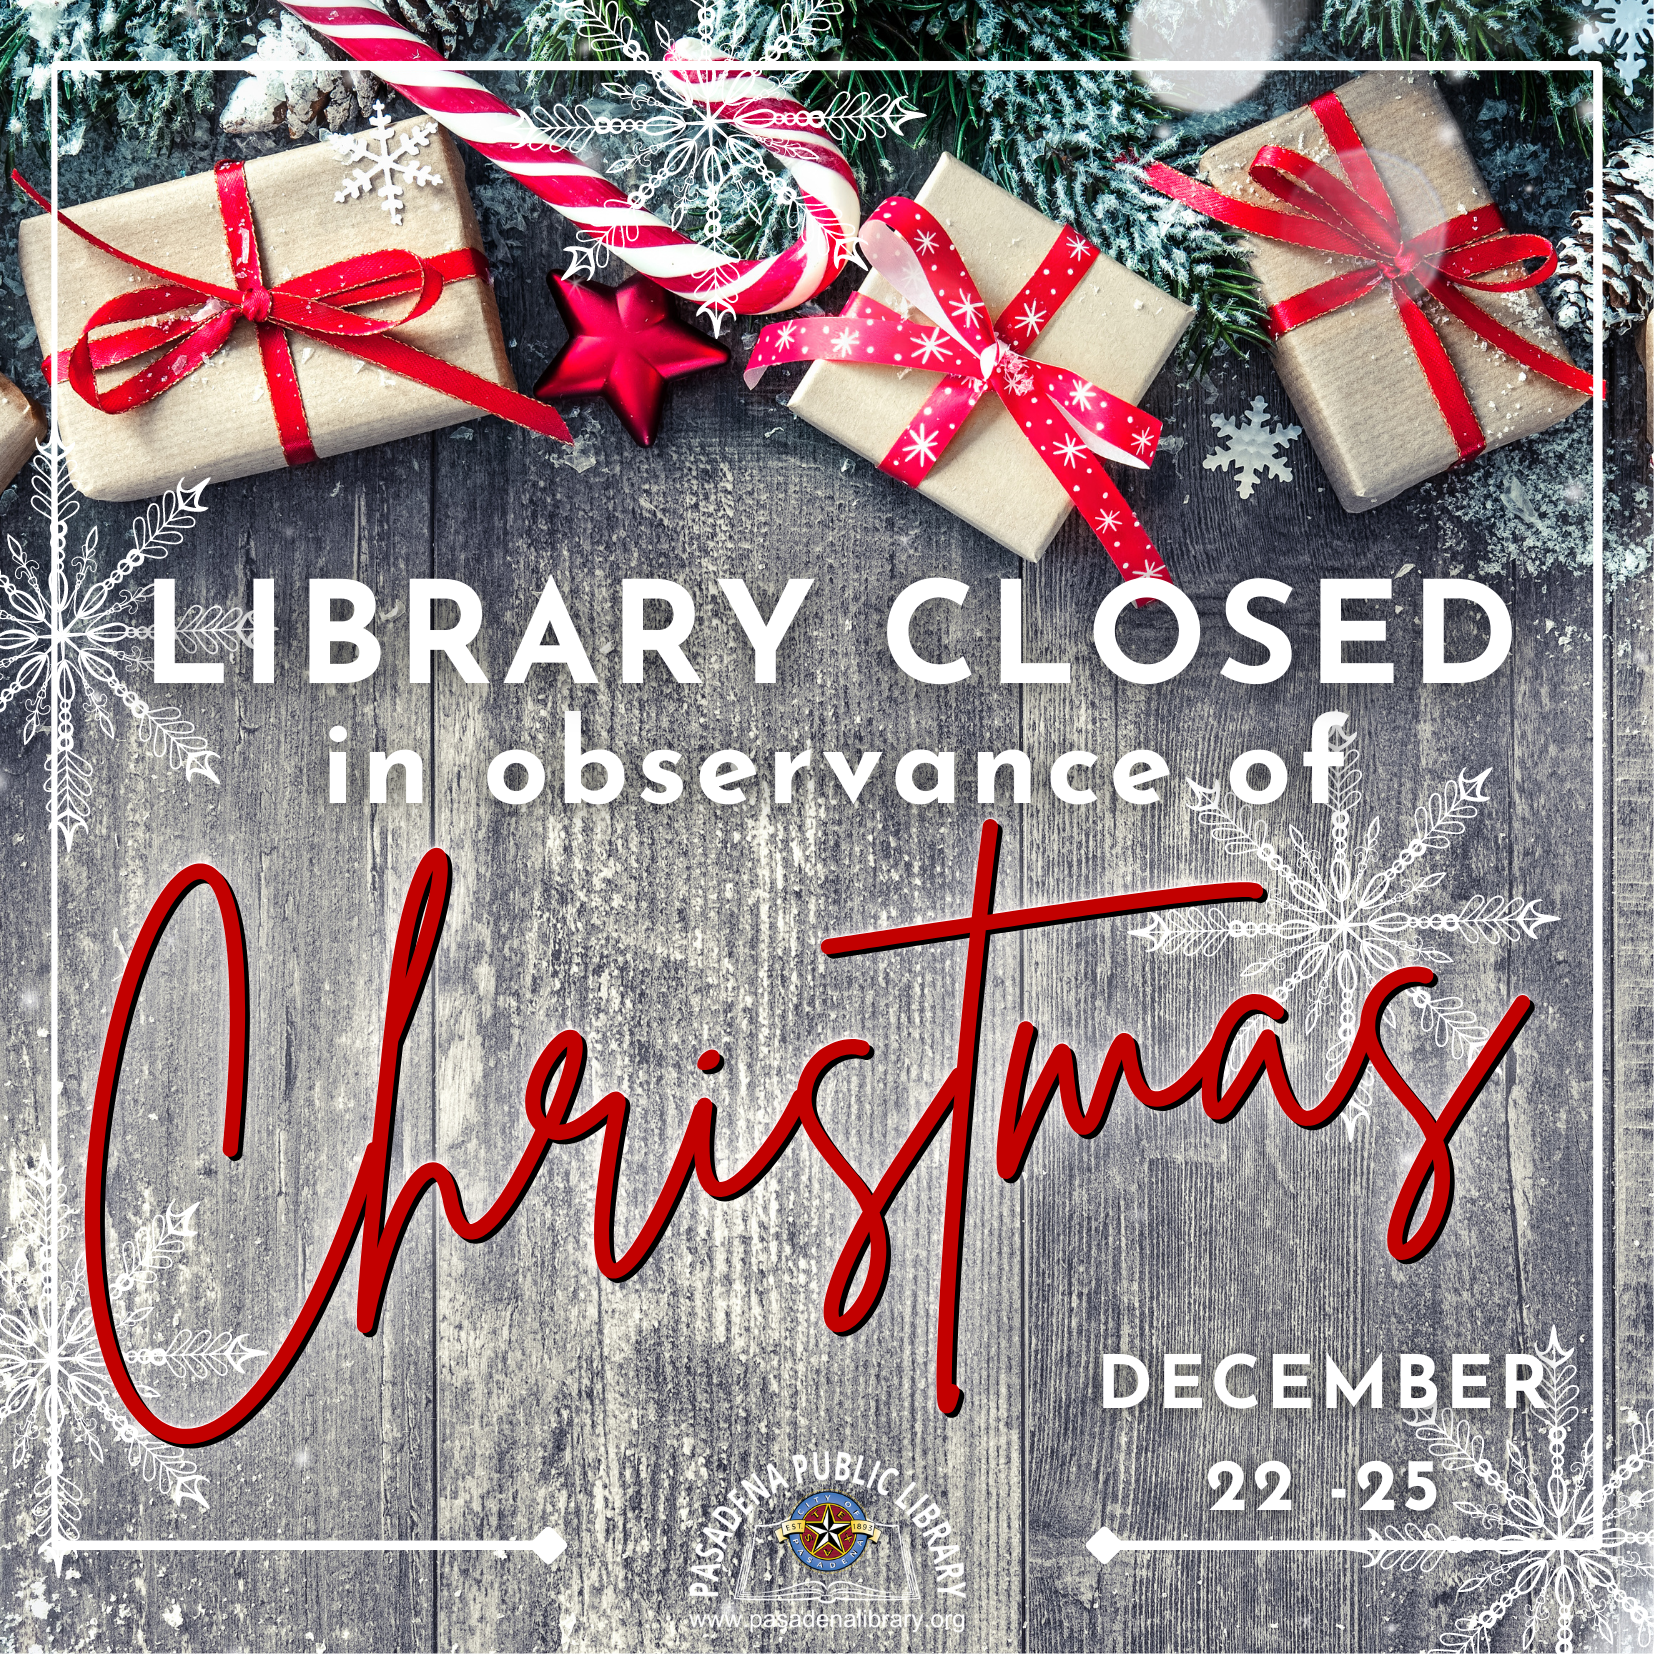 The Pasadena Public Library will be CLOSED Friday, December 22 through Monday, December 25 in observance of CHRISTMAS!  Library locations will re-open on Tuesday, December 26 at 10:00AM.